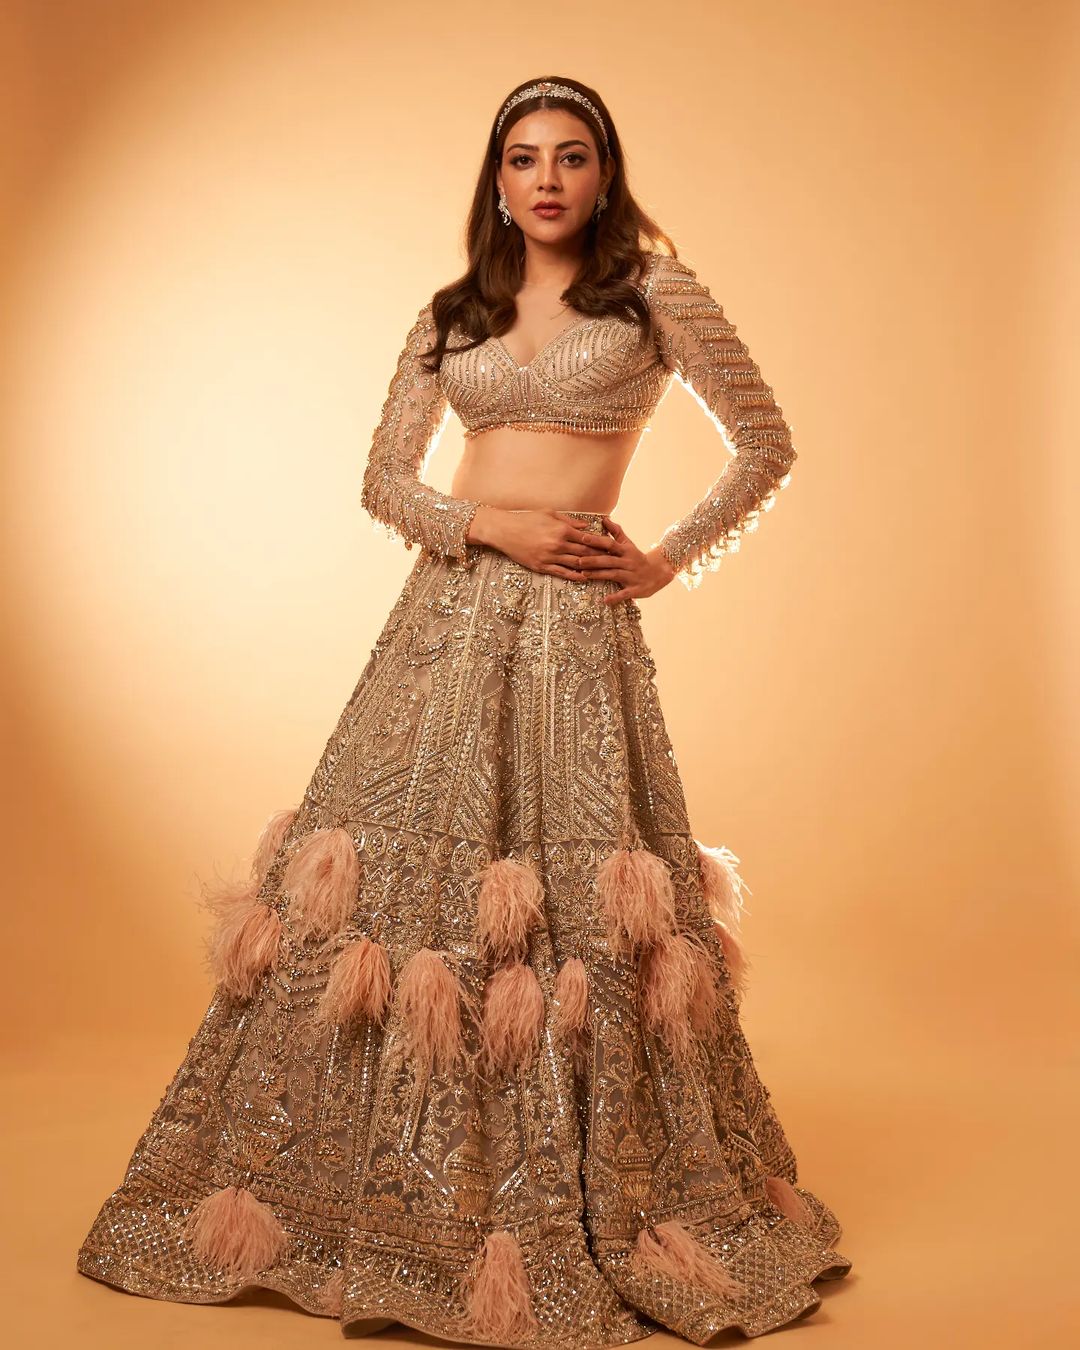 Buy URS Golden Sequin Lehenga With Wine Back Knot Blouse at Amazon.in